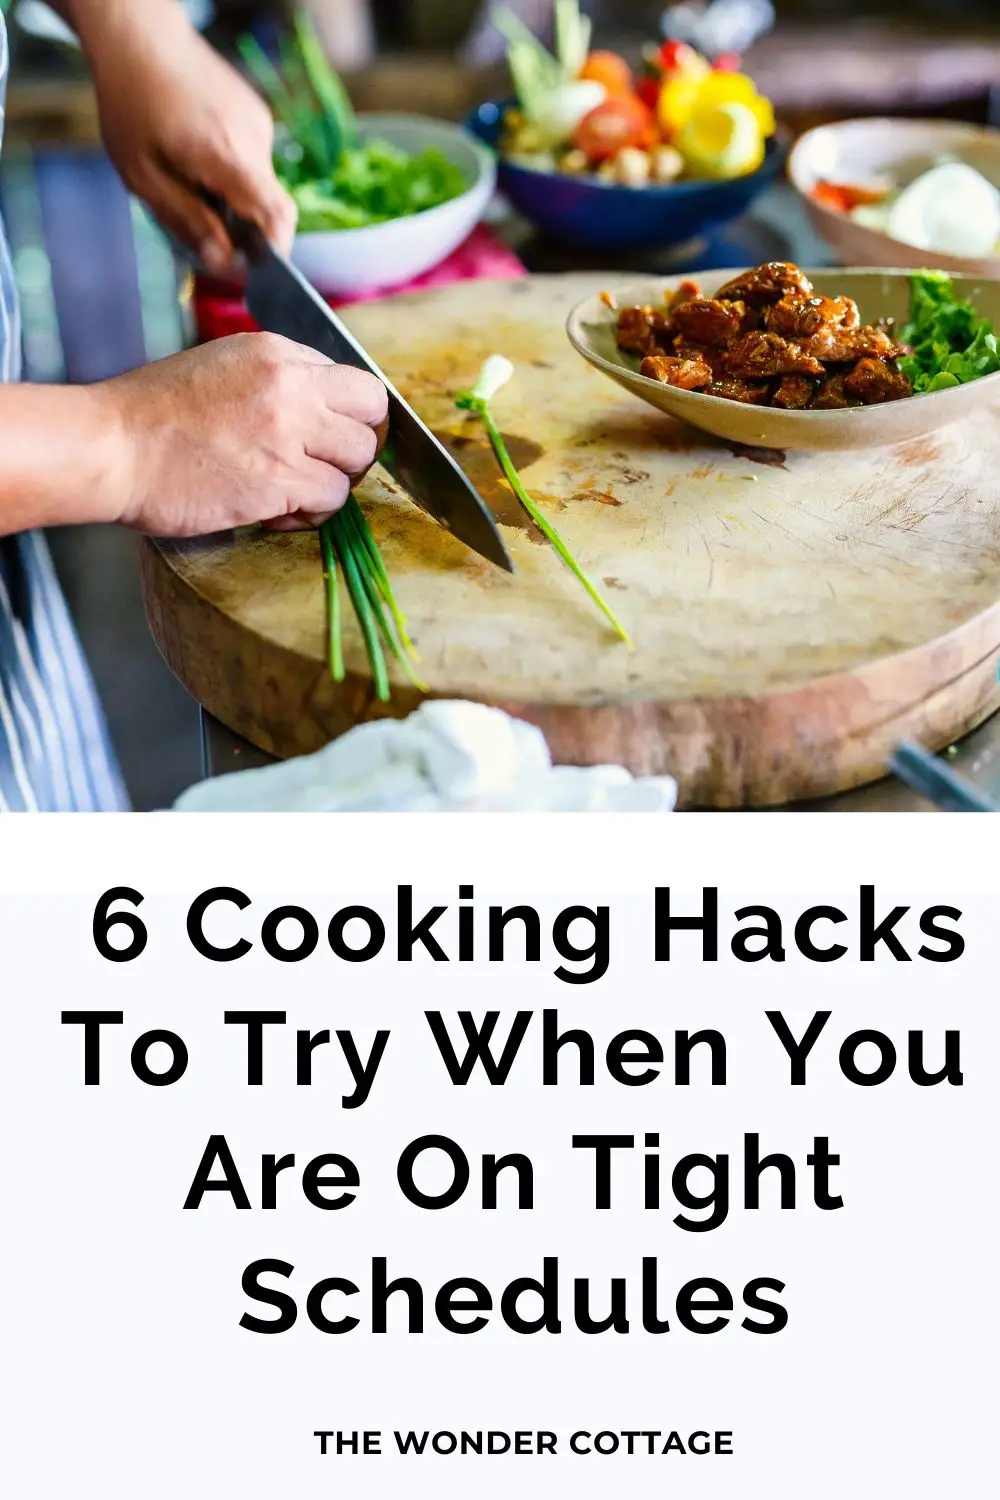 6 cooking hacks to try when you are on a tight schedule